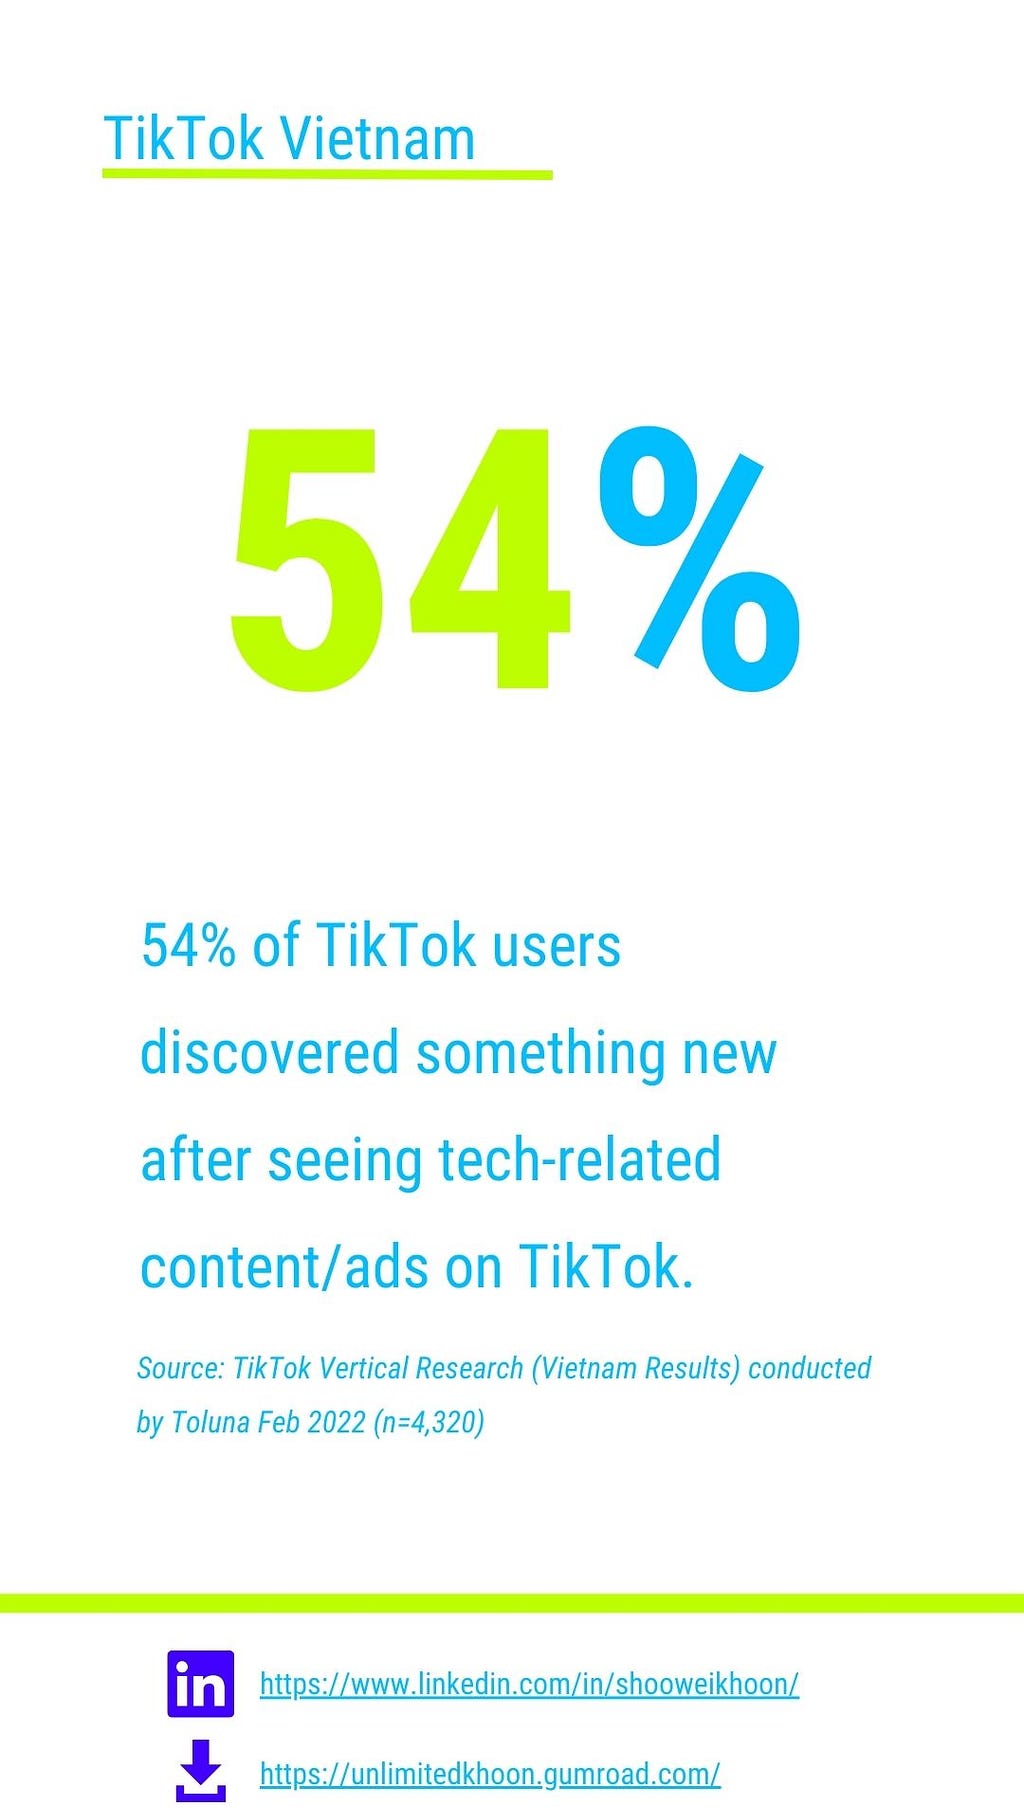 54% of VN TikTok users discovered something new after seeing tech-related contentads on TikTok.